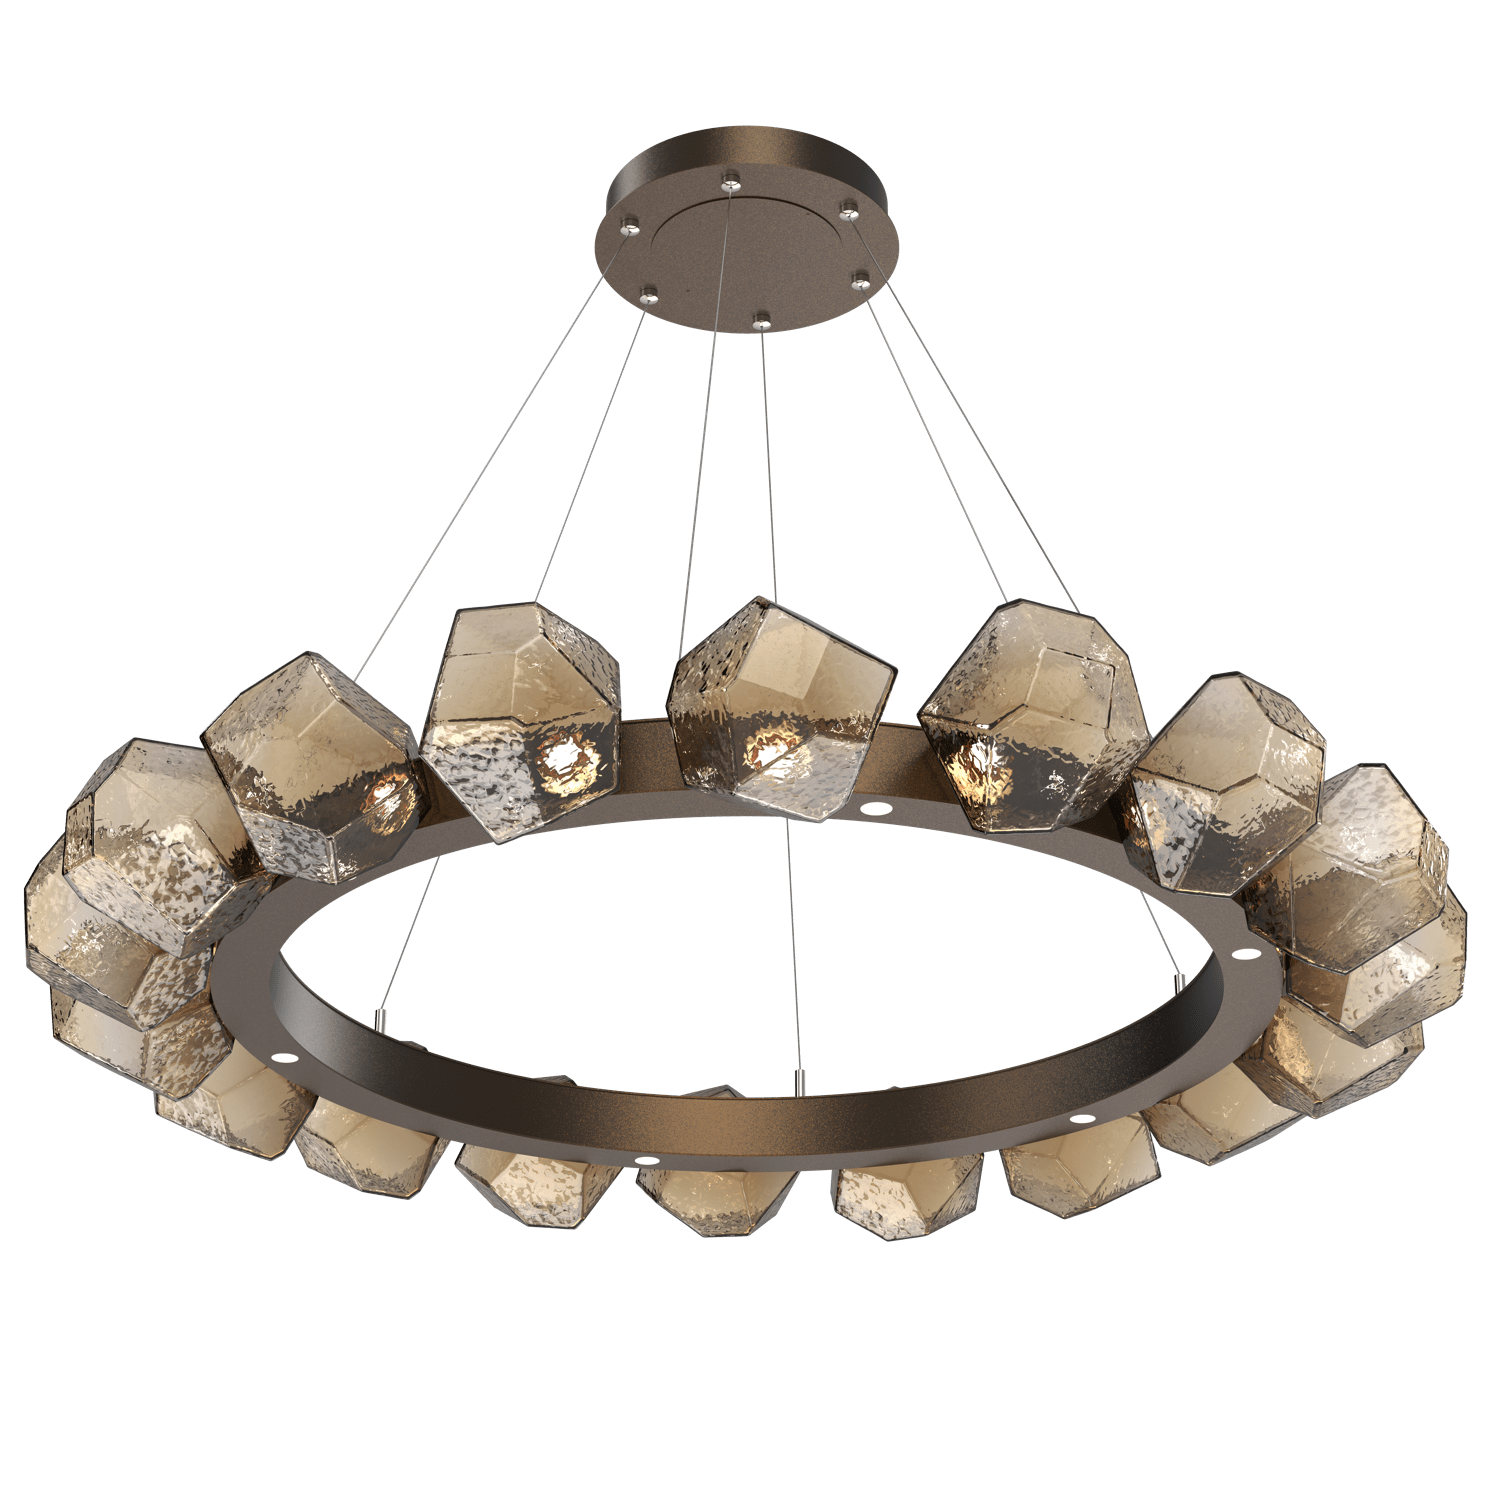 CHB0039-48-FB-B-Hammerton-Studio-Gem-48-inch-radial-ring-chandelier-with-flat-bronze-finish-and-bronze-blown-glass-shades-and-LED-lamping